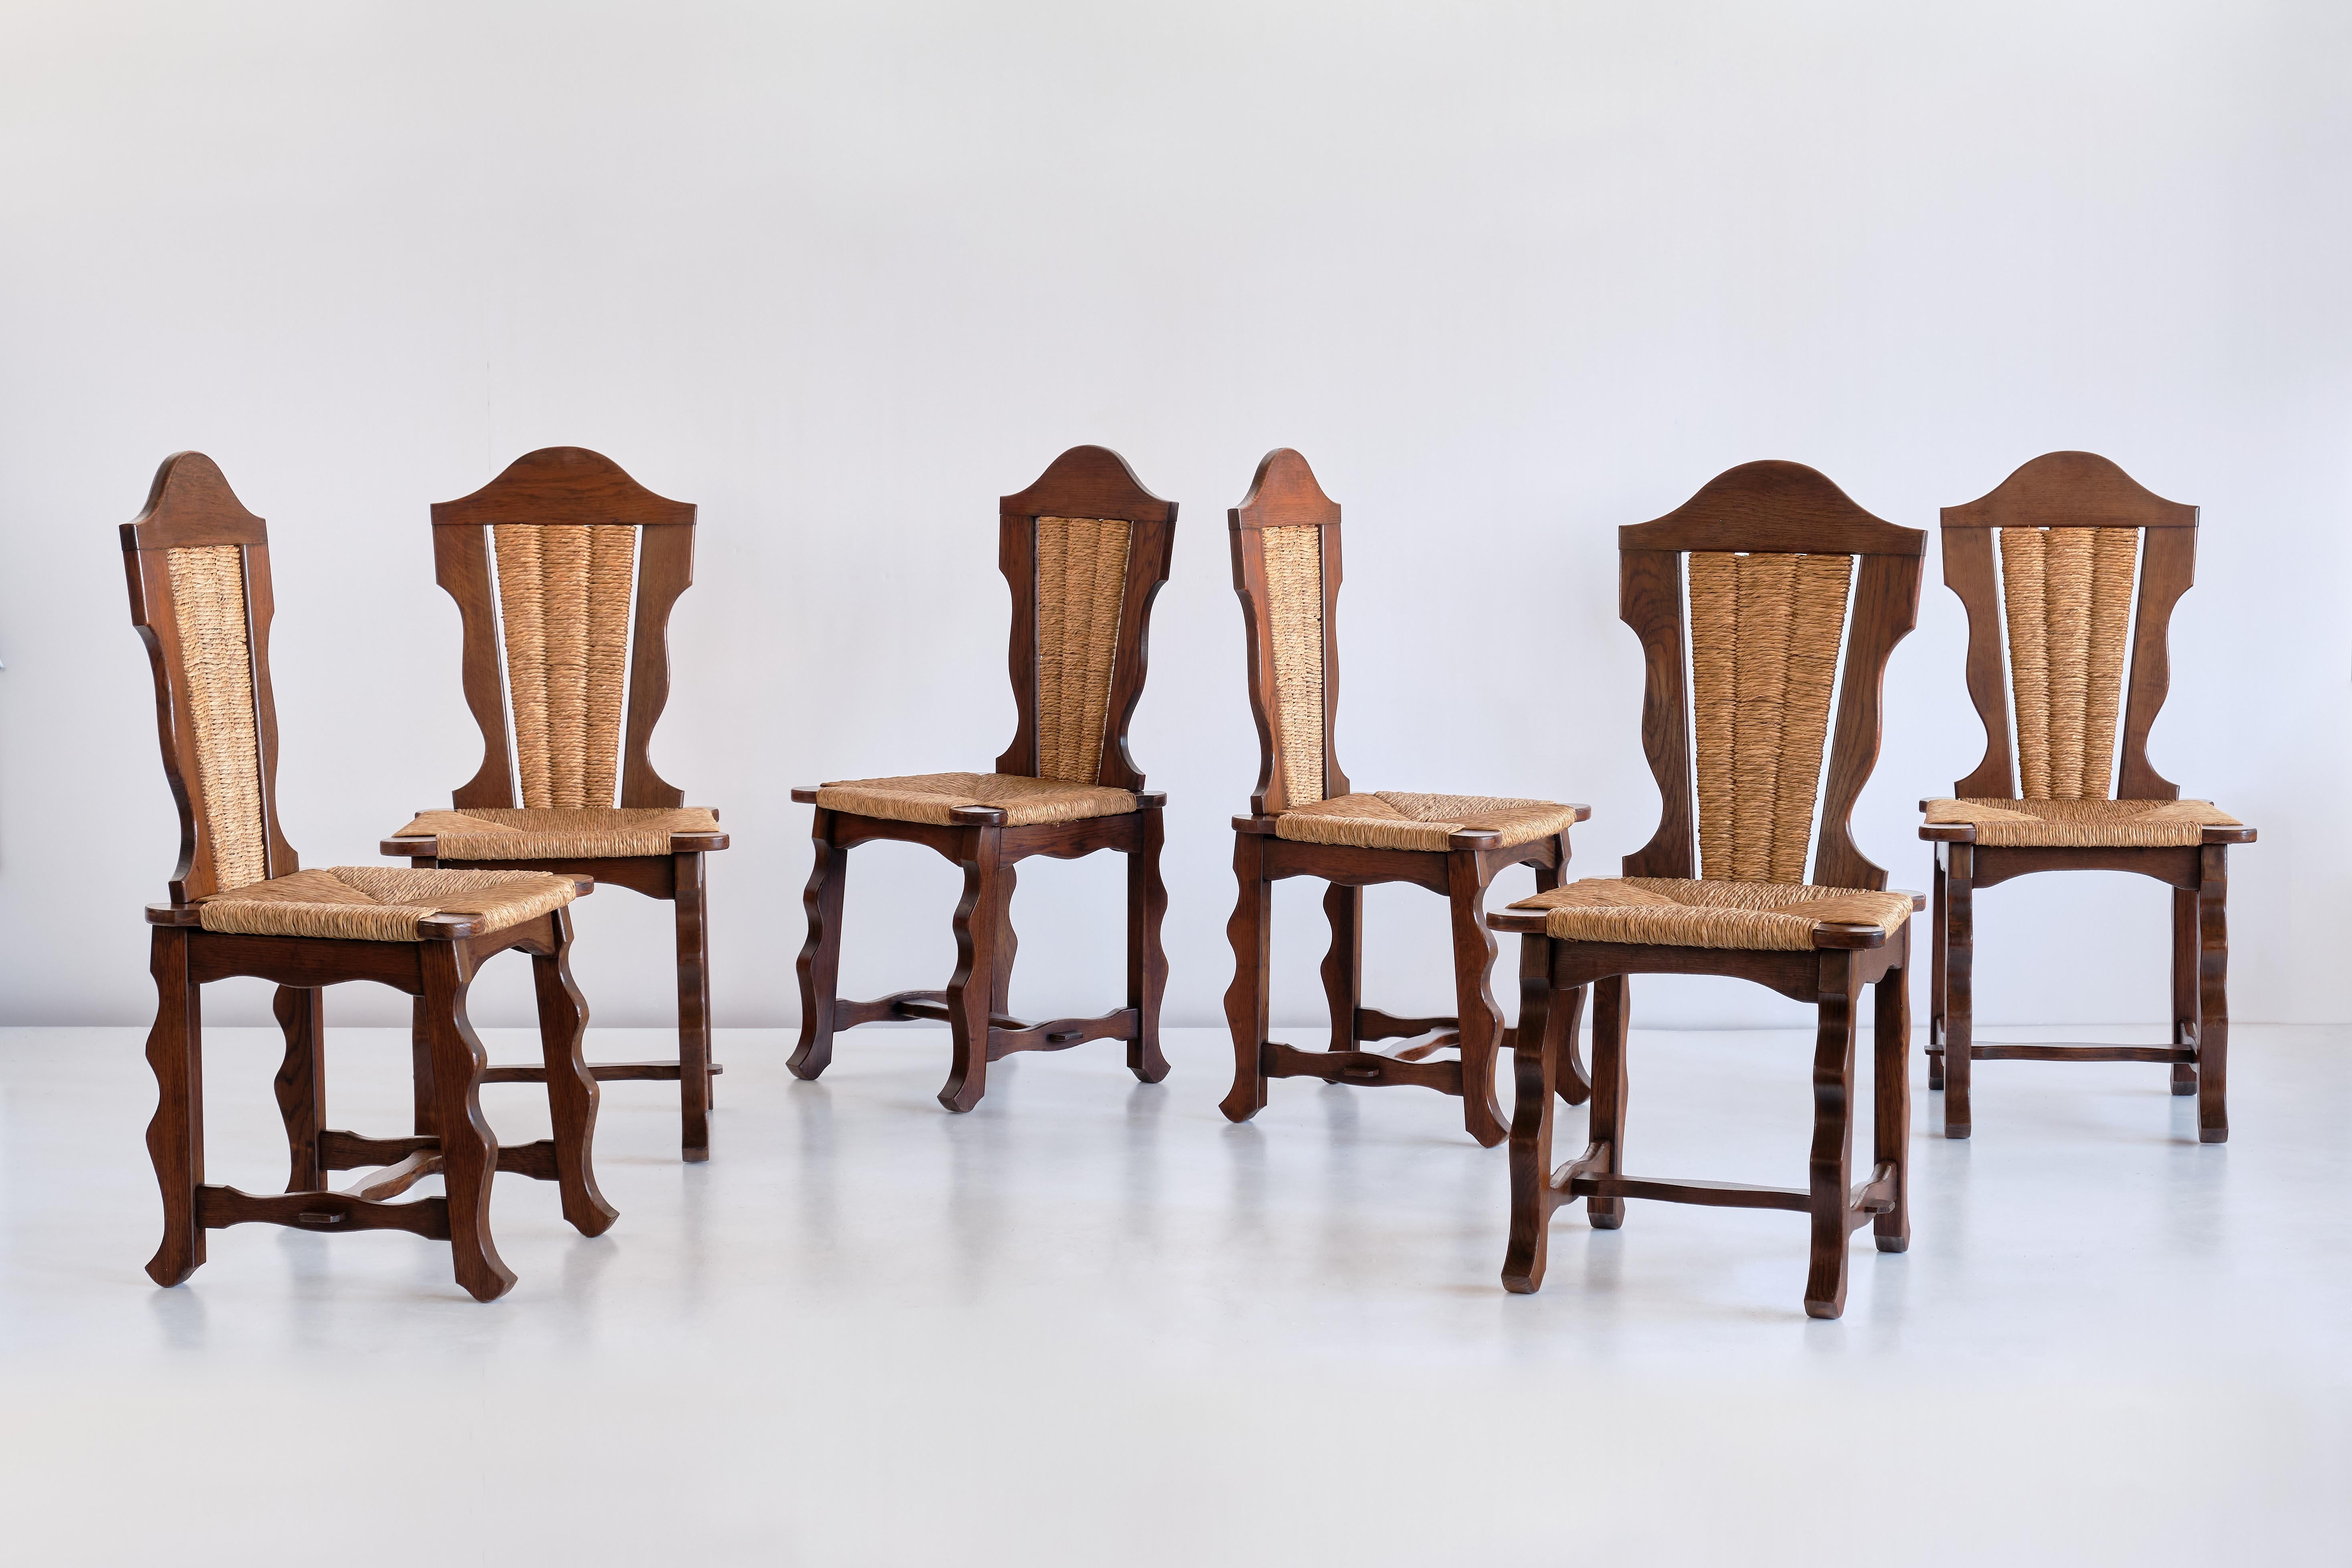 This striking set of six dining chairs was produced in the Northern Basque region around the city of Biarritz in the 1950s. The design is attributed to Victor Courtray.
The chairs are in solid, stained oak with the backrest and seat in woven rush.